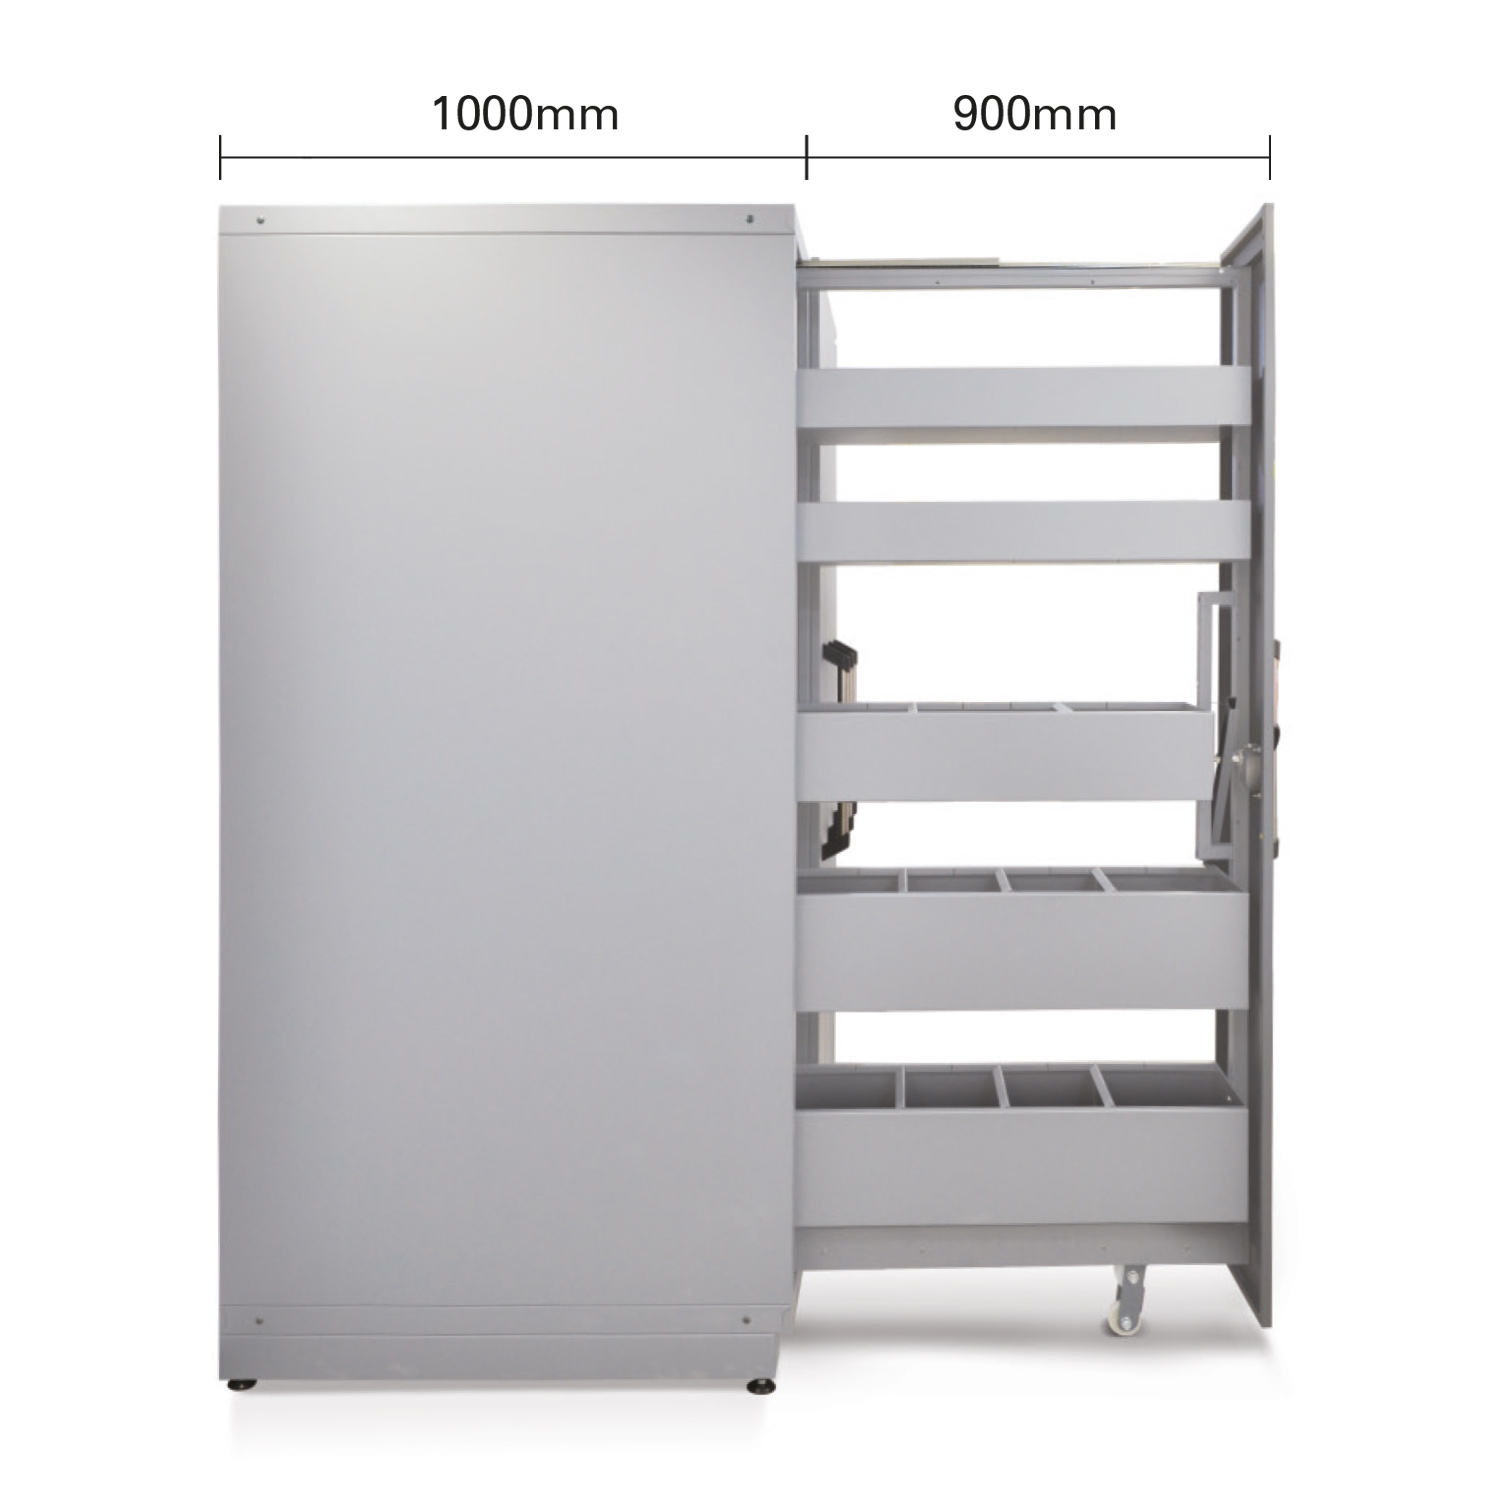 Vertical Special Service Tool Cabinets (1m deep)